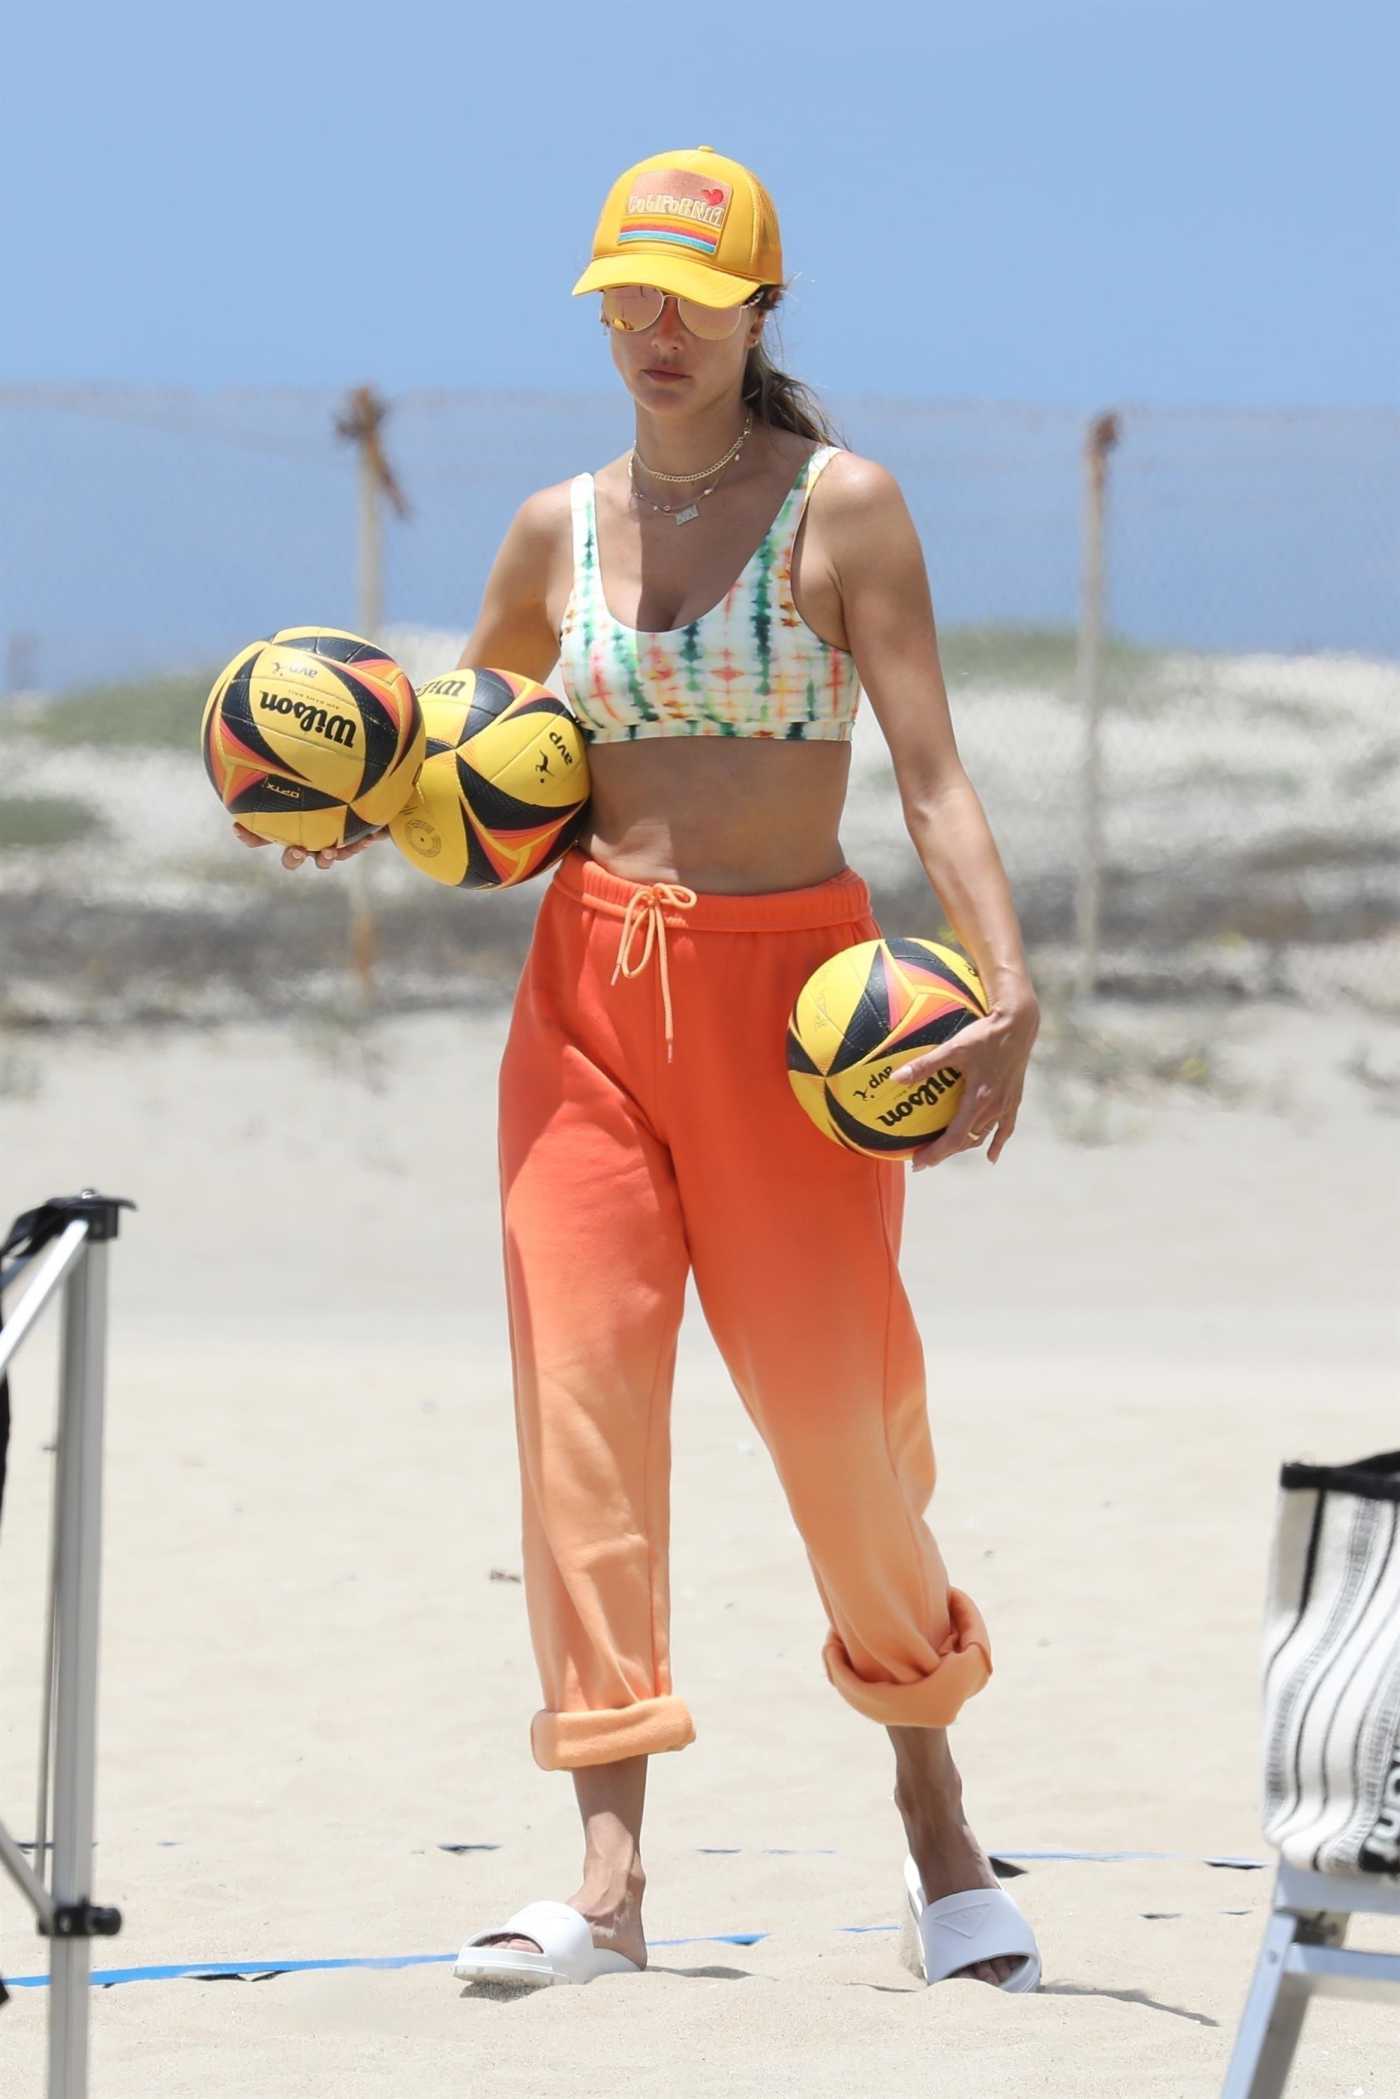 Alessandra Ambrosio in an Orange Sweatpants Attends a Beach Volleyball Practice on the Beach in Santa Monica 07/14/2022